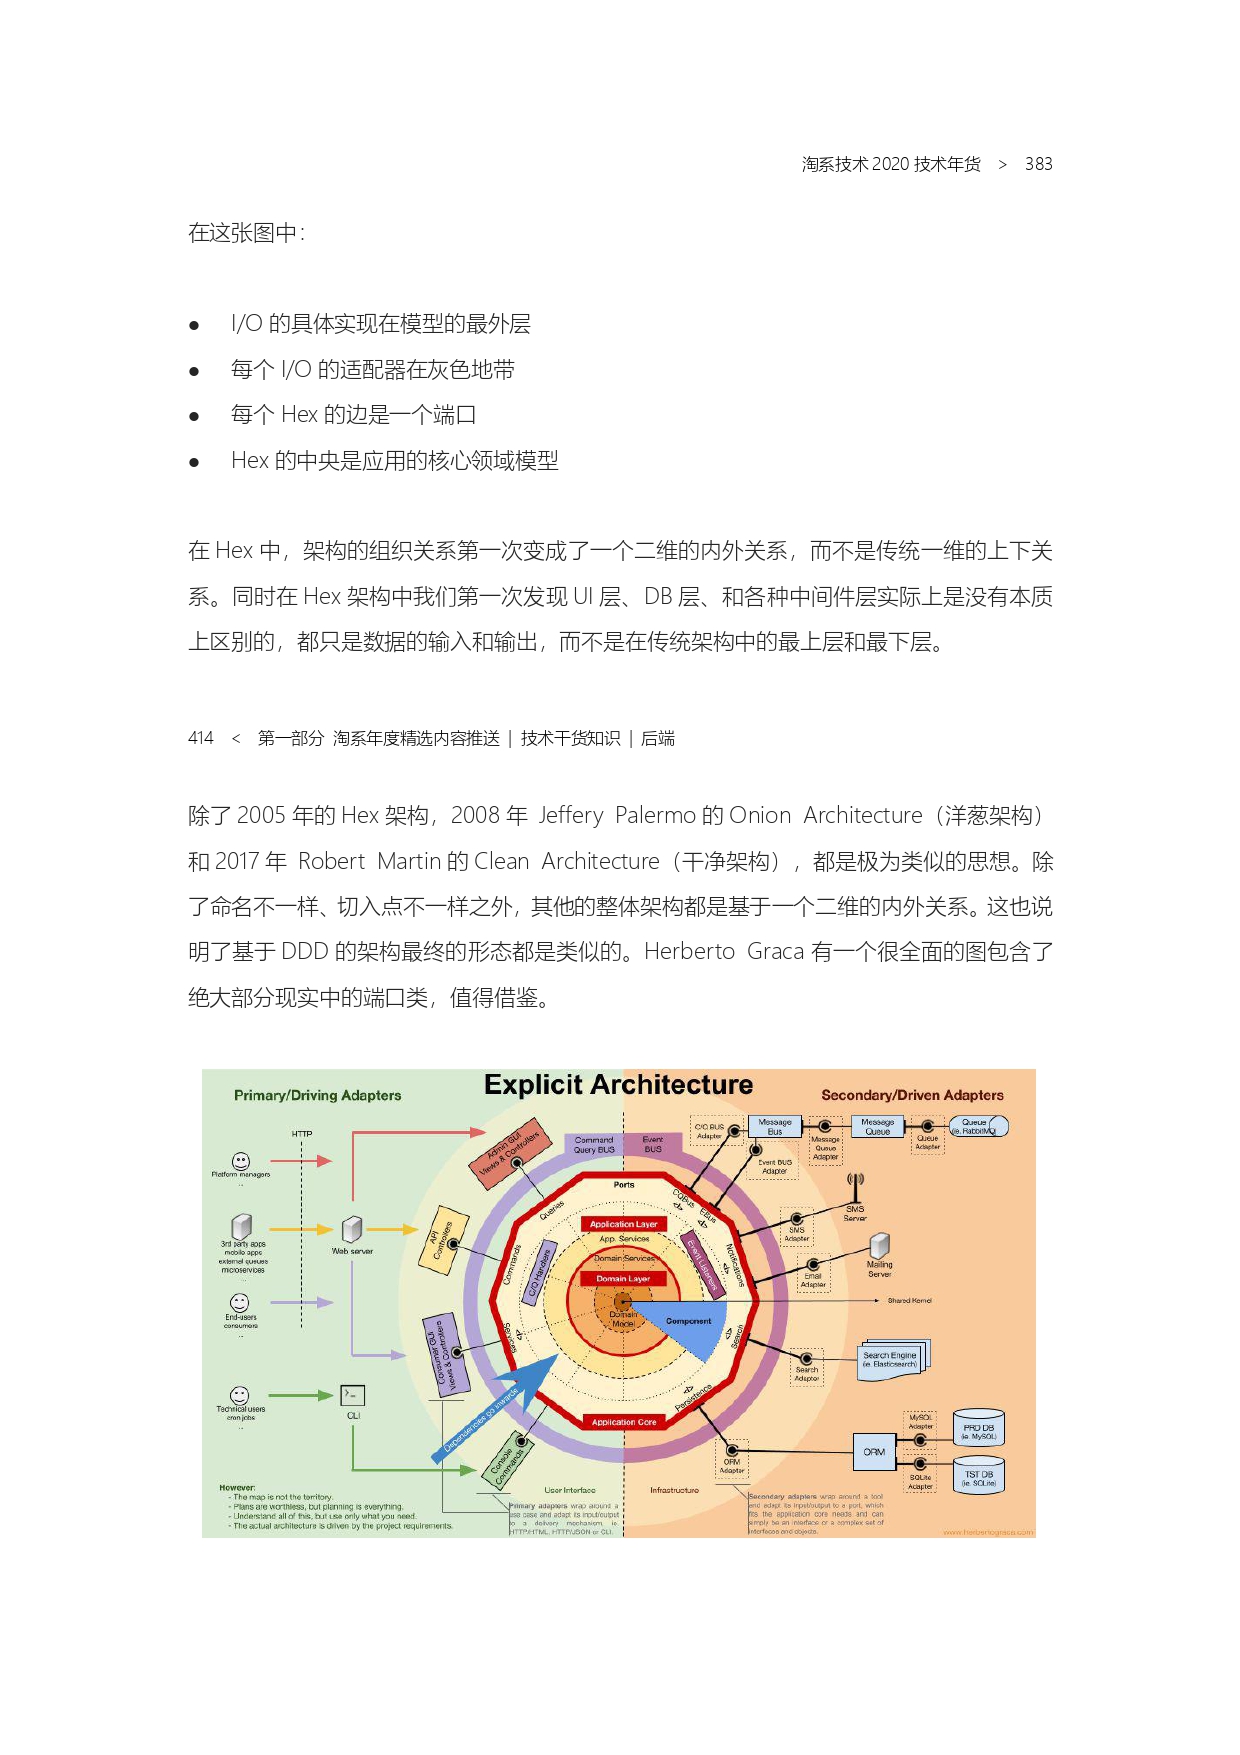 The Complete Works of Tao Technology 2020-1-570_page-0383.jpg